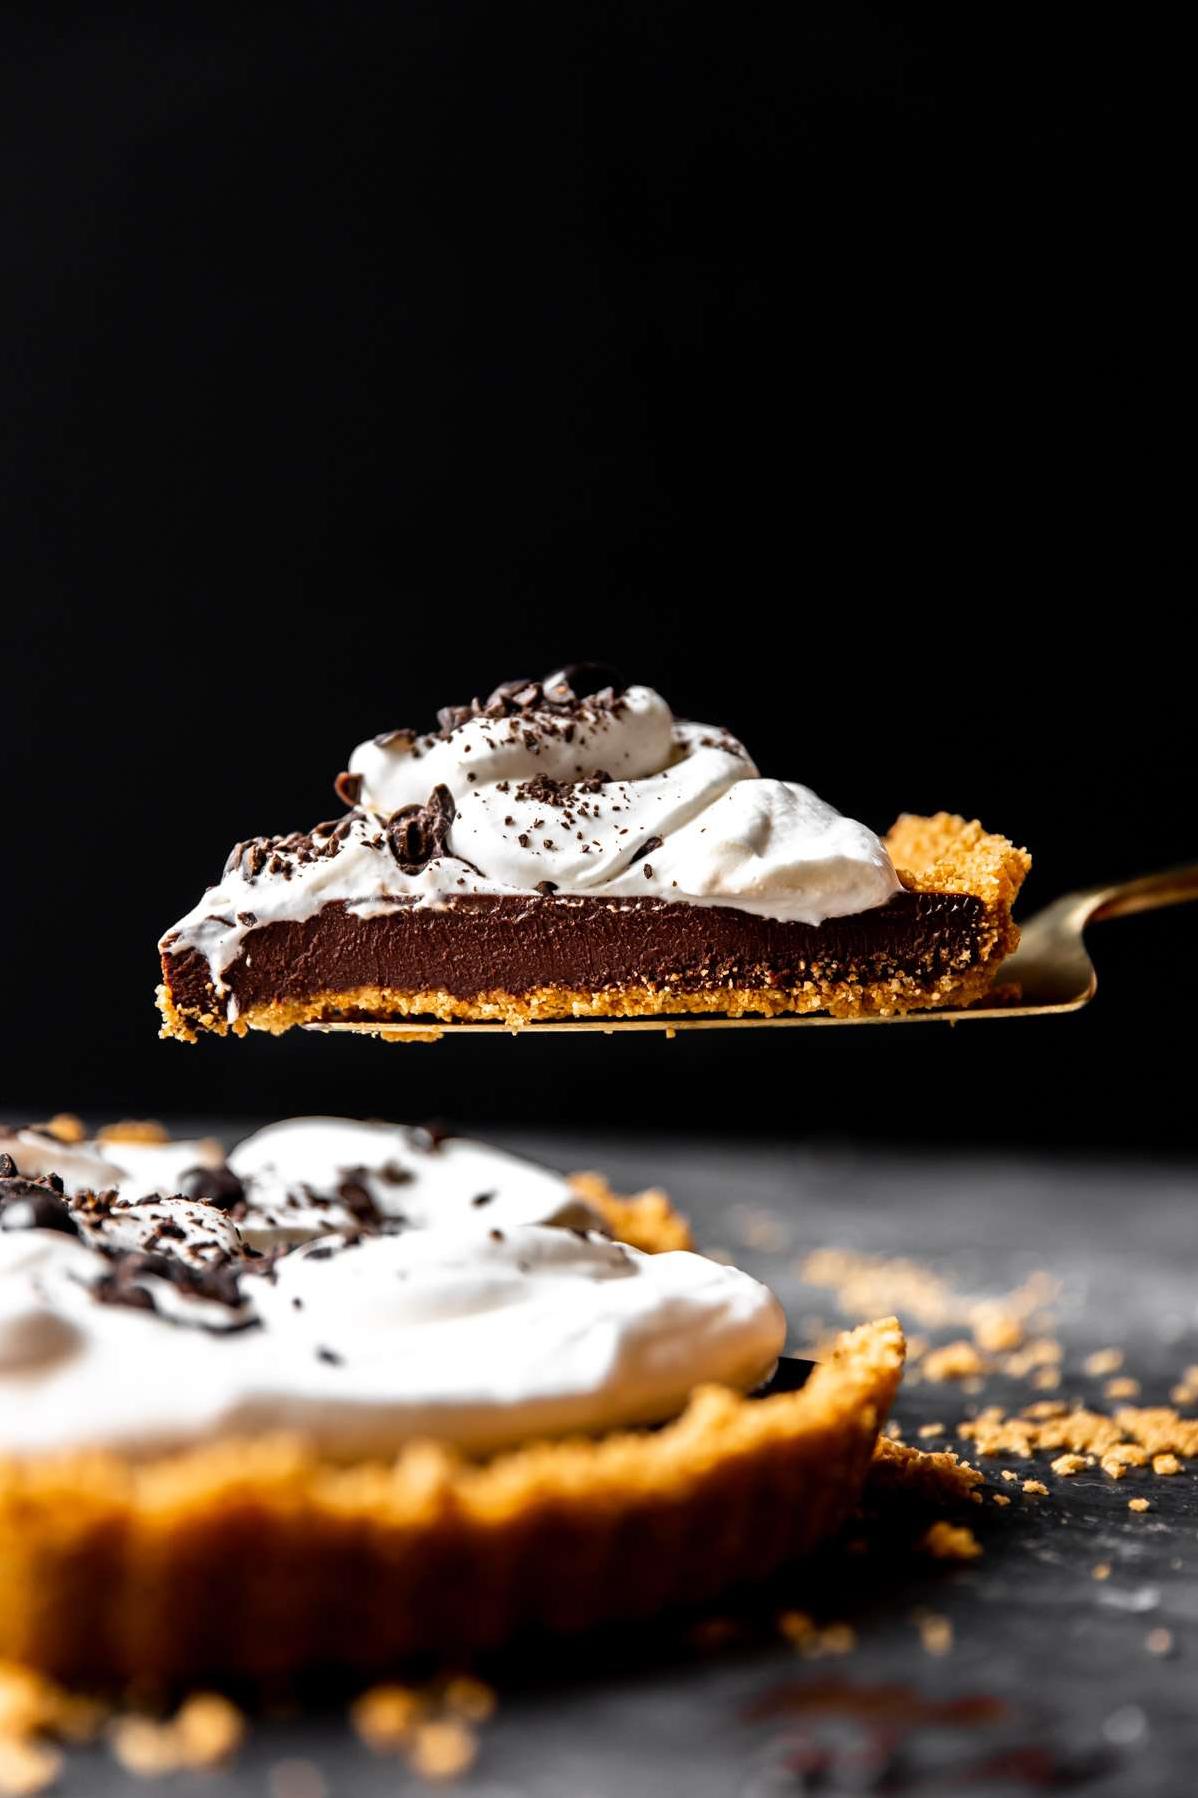  Get ready to indulge in these decadent chocolate tarts!